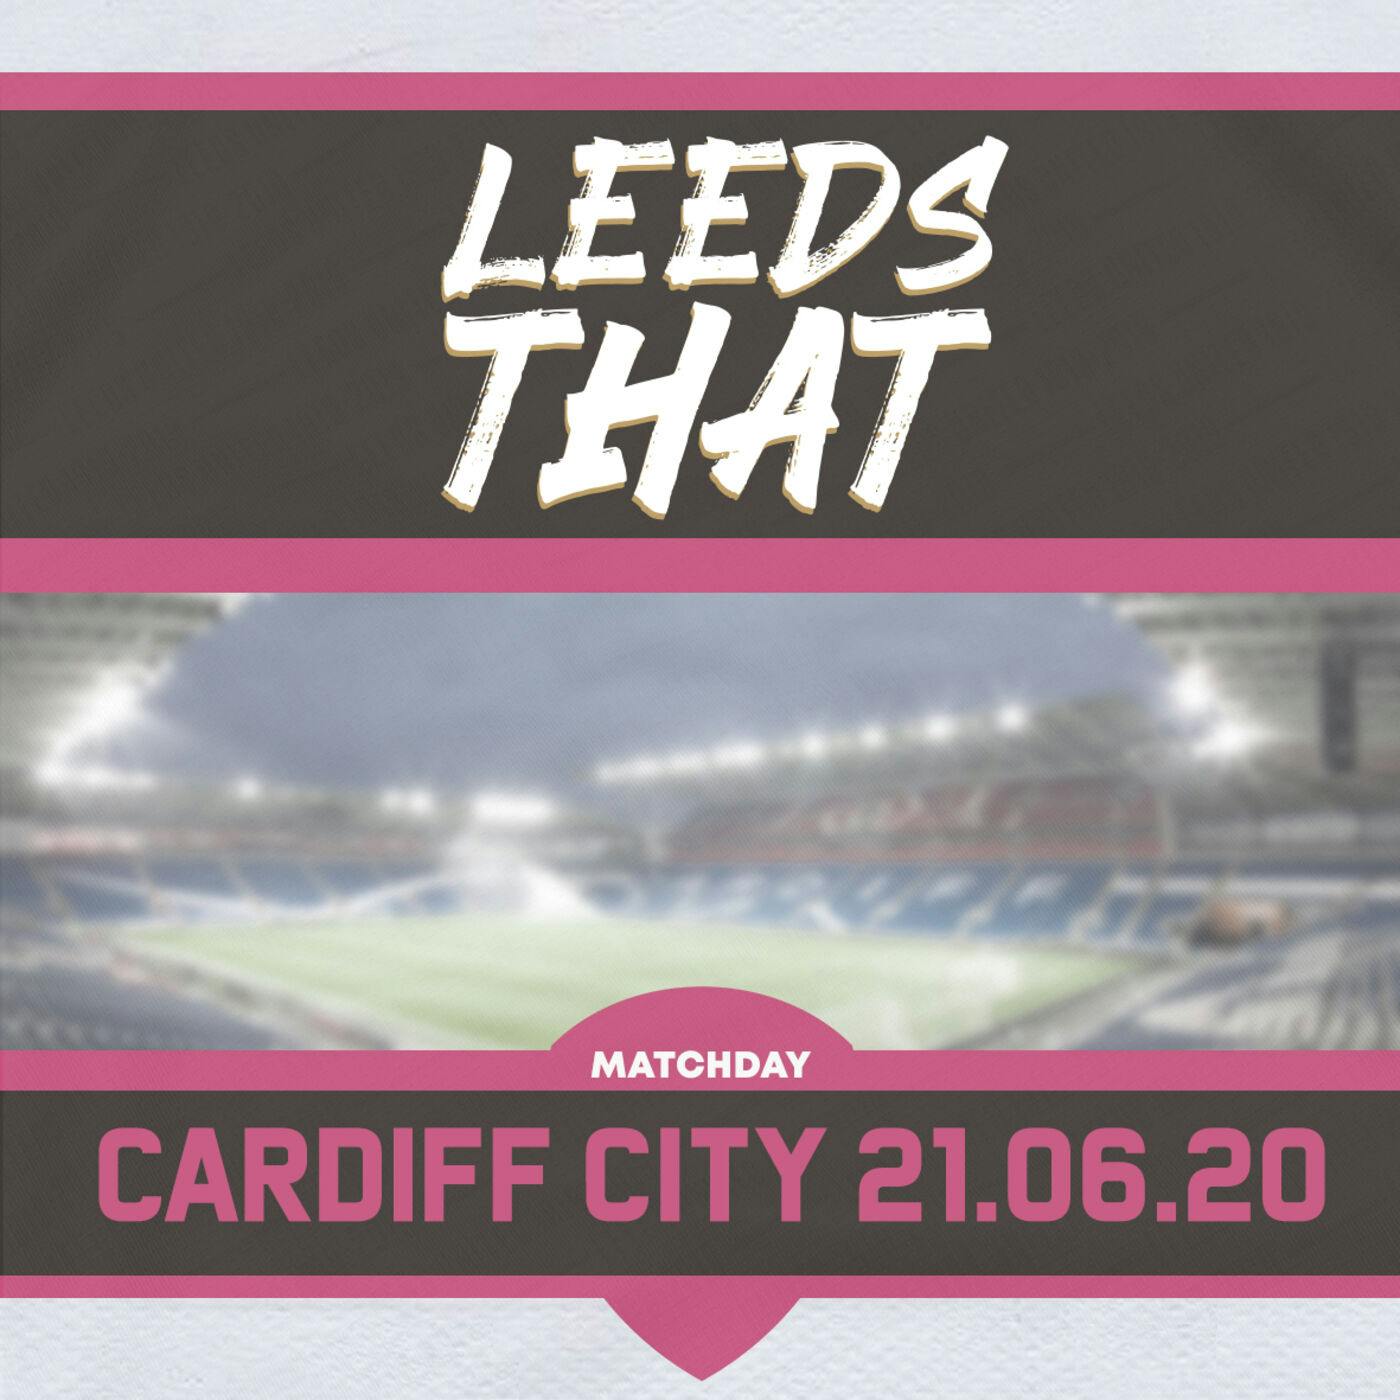 66 | Match Day - Cardiff City (A) 21.06.20